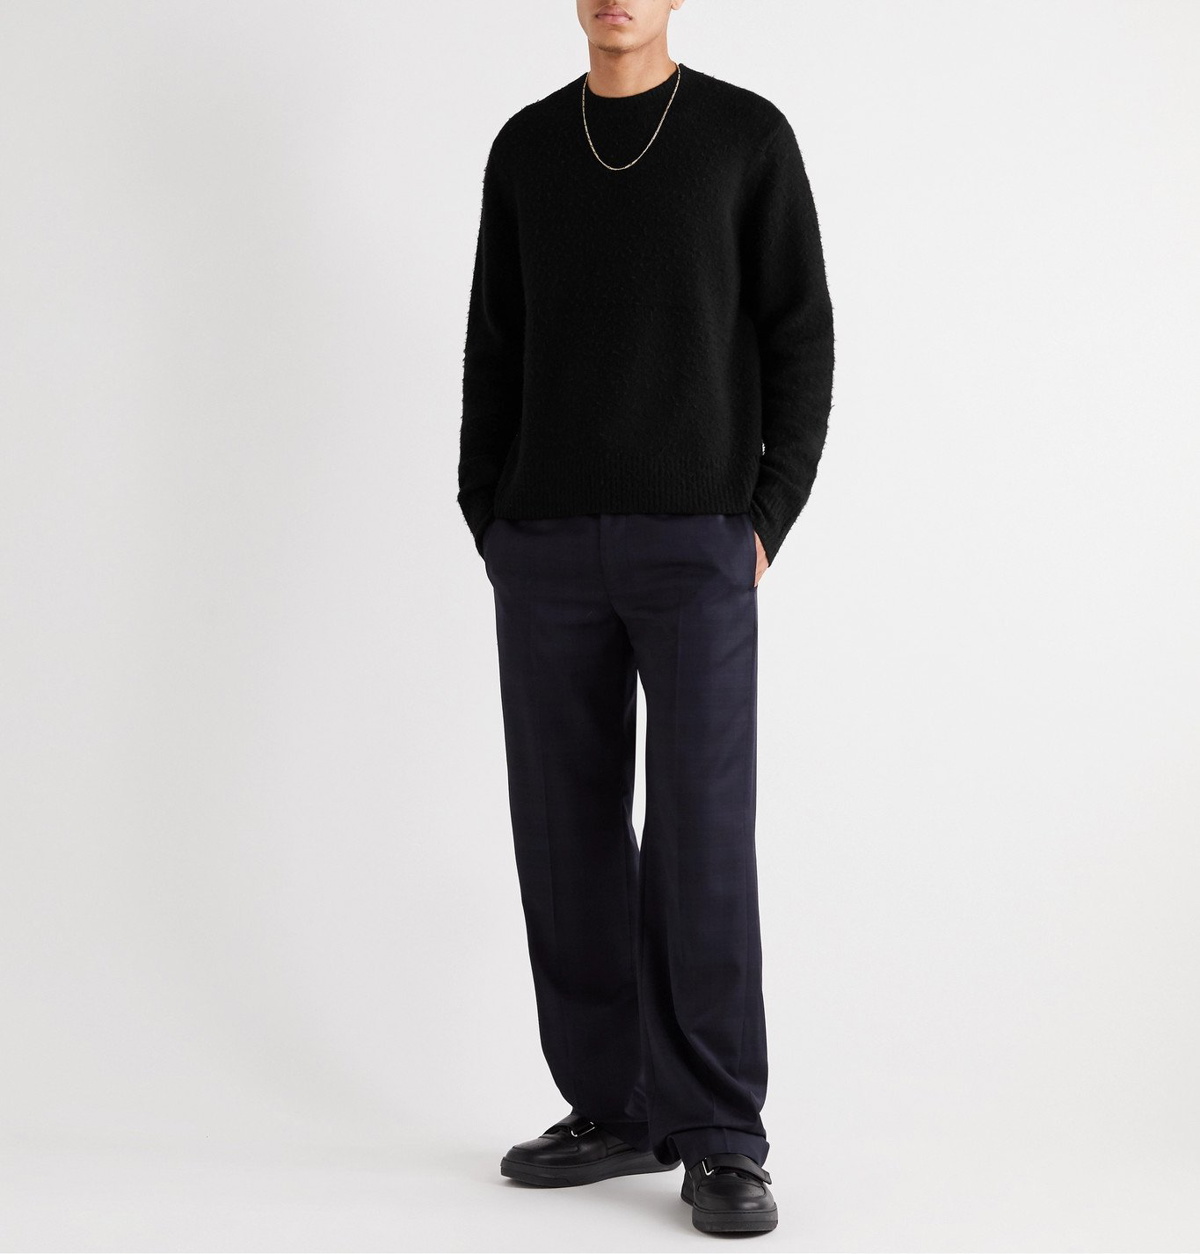 Acne Studios - Pilled Wool and Cashmere-Blend Sweater - Black Acne Studios